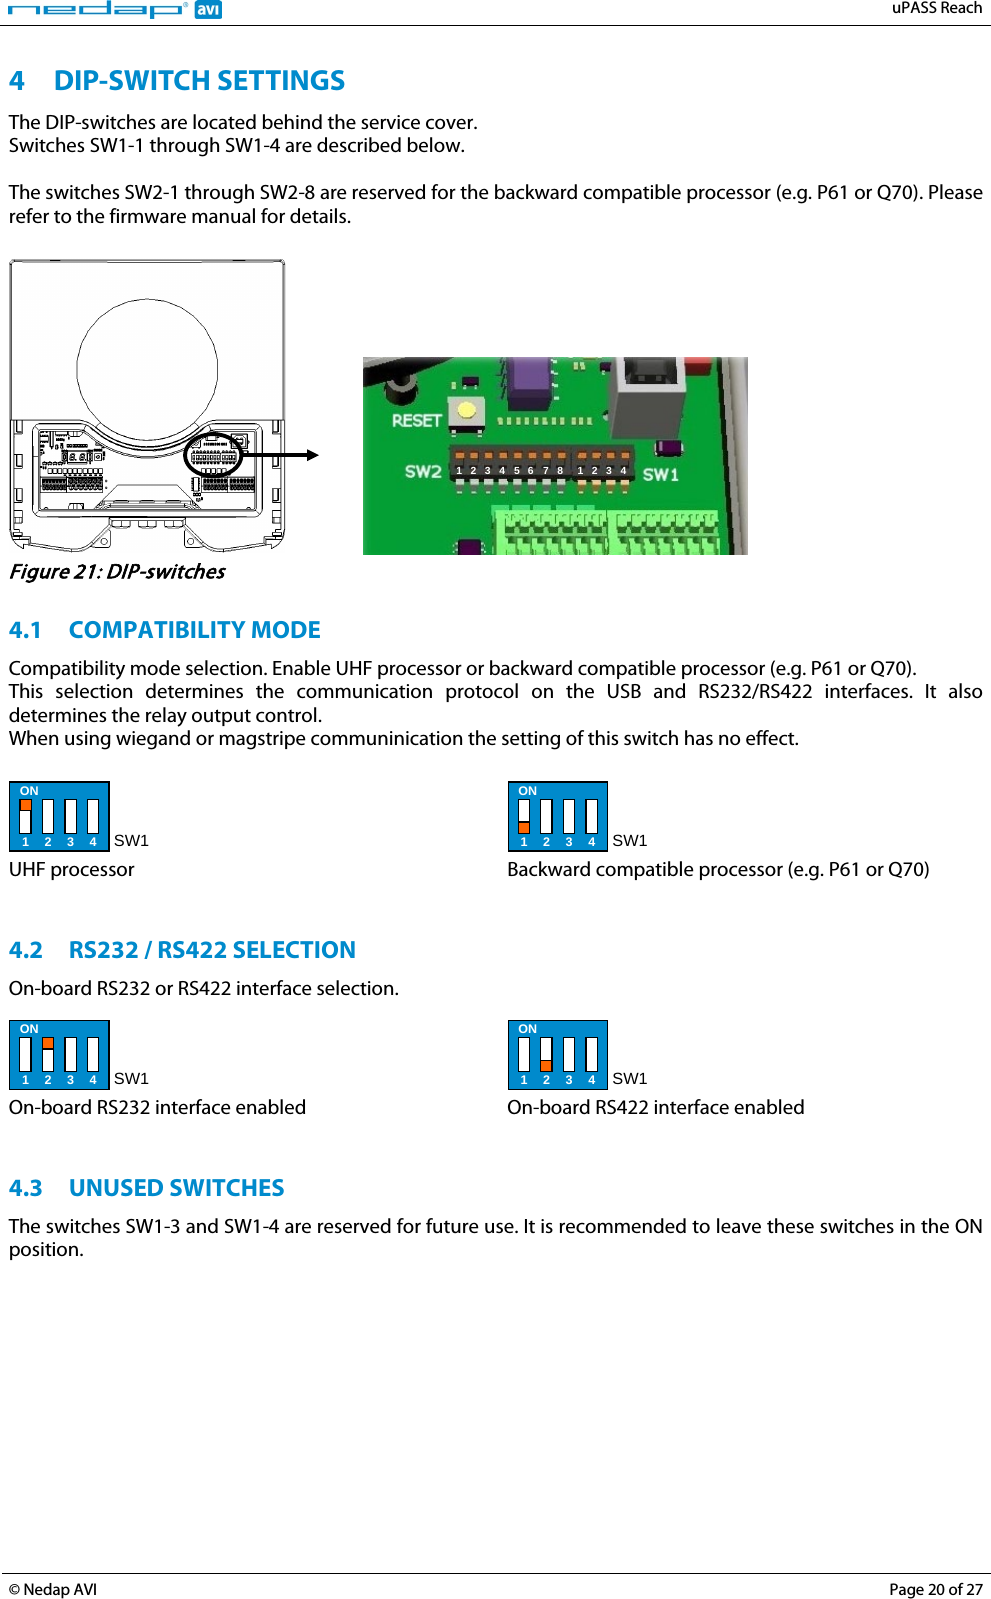   uPASS Reach  © Nedap AVI Page 20 of 27  4 DIP-SWITCH SETTINGS The DIP-switches are located behind the service cover. Switches SW1-1 through SW1-4 are described below.  The switches SW2-1 through SW2-8 are reserved for the backward compatible processor (e.g. P61 or Q70). Please refer to the firmware manual for details.     1  2  3  4  5  6  7  8  1  2 3  4  Figure 21: DIP-switches  4.1 COMPATIBILITY MODE Compatibility mode selection. Enable UHF processor or backward compatible processor (e.g. P61 or Q70). This selection determines the communication protocol on the USB and RS232/RS422 interfaces. It also determines the relay output control. When using wiegand or magstripe communinication the setting of this switch has no effect.   ON 1 2 3 4 SW1  UHF processor  ON 1 2 3 4 SW1  Backward compatible processor (e.g. P61 or Q70)   4.2 RS232 / RS422 SELECTION On-board RS232 or RS422 interface selection.  ON 1 2 3 4 SW1  On-board RS232 interface enabled  ON 1 2 3 4 SW1  On-board RS422 interface enabled   4.3 UNUSED SWITCHES The switches SW1-3 and SW1-4 are reserved for future use. It is recommended to leave these switches in the ON position.  